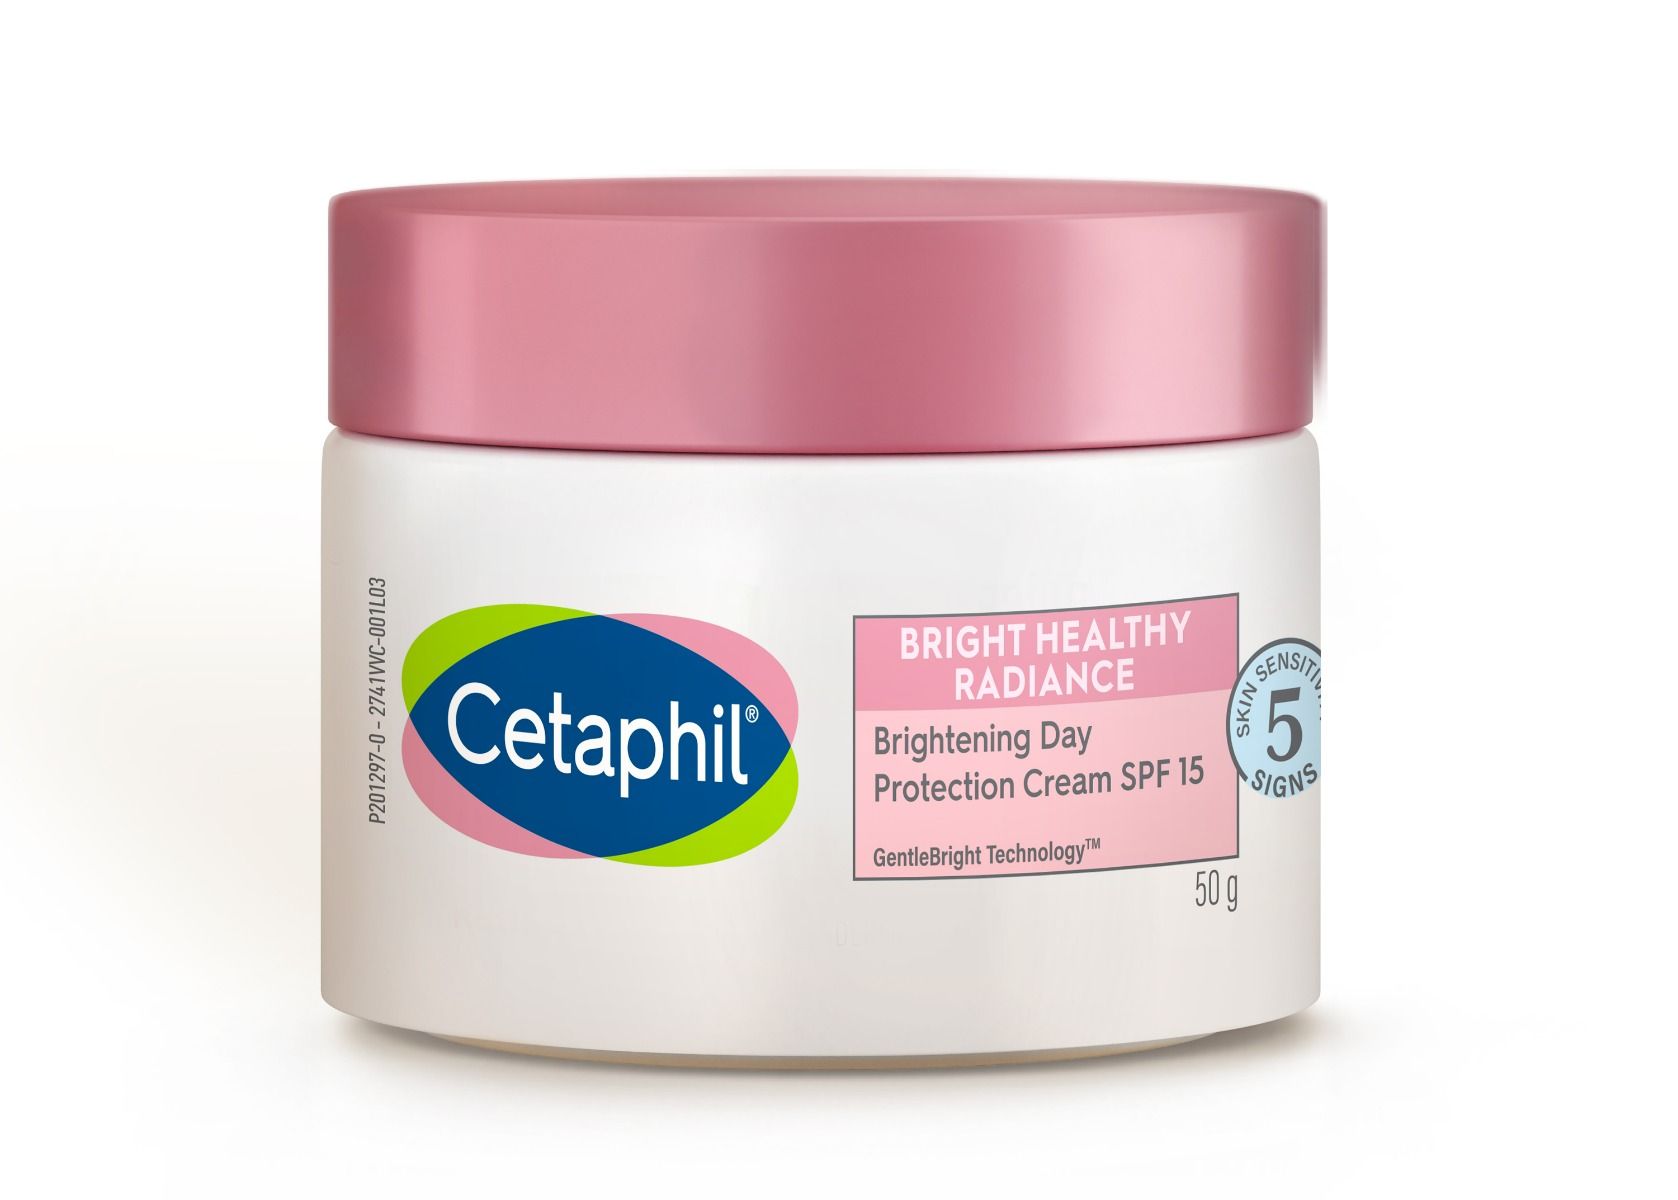 Cetaphil Brightening Day Protection SPF 15 Cream, 50 gm, Pack of 1 